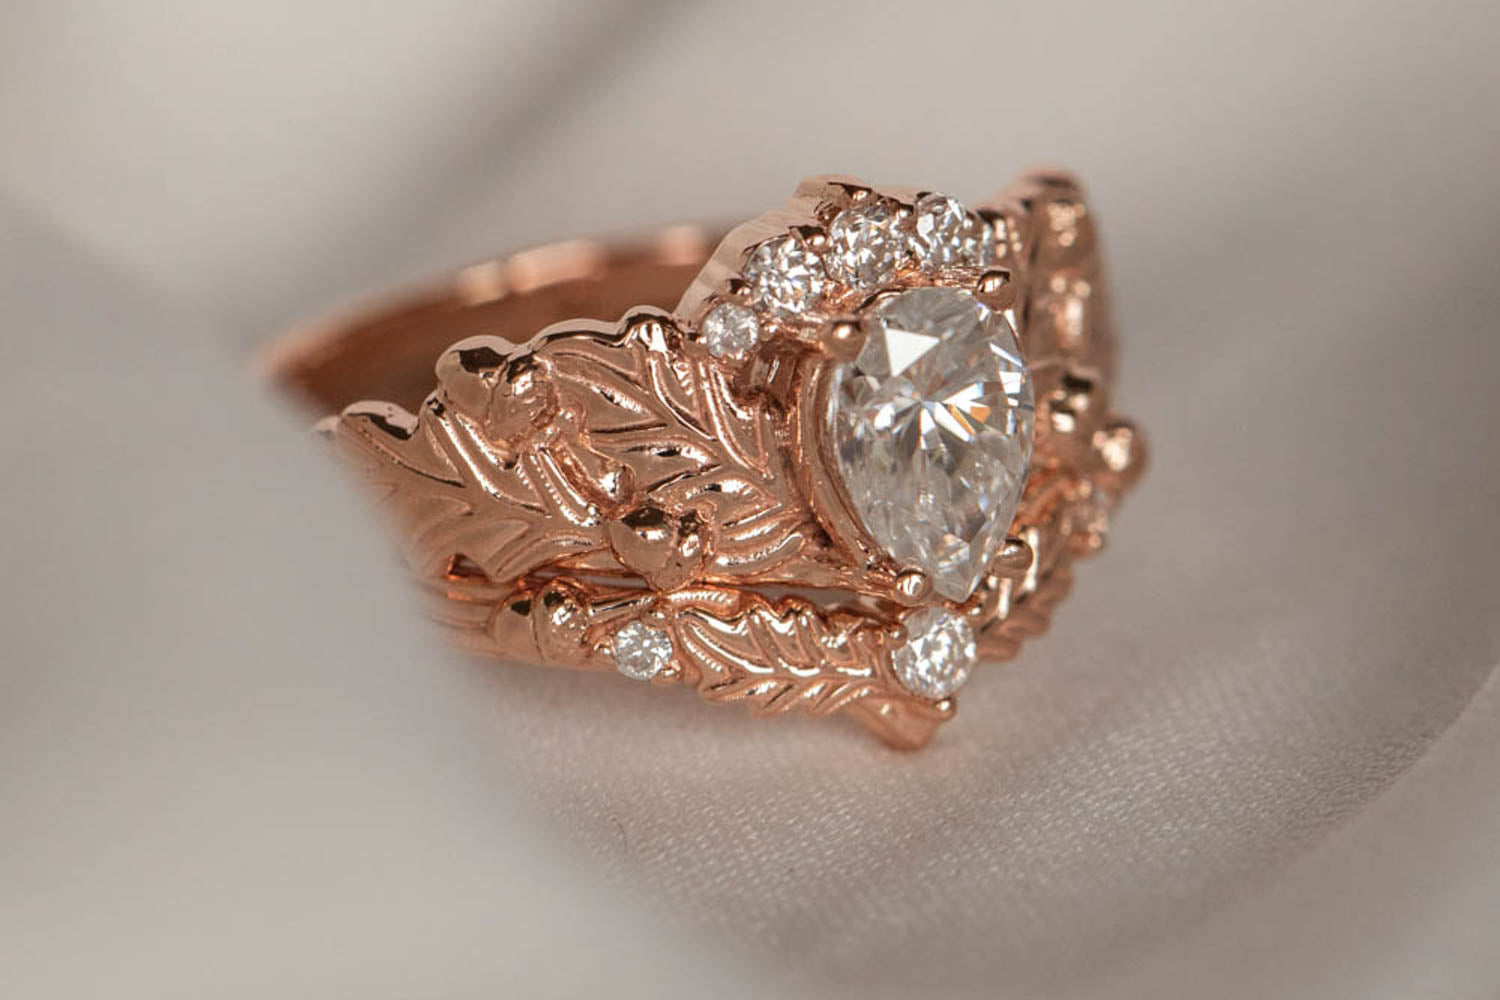 Oak leaves gold engagement and wedding rings